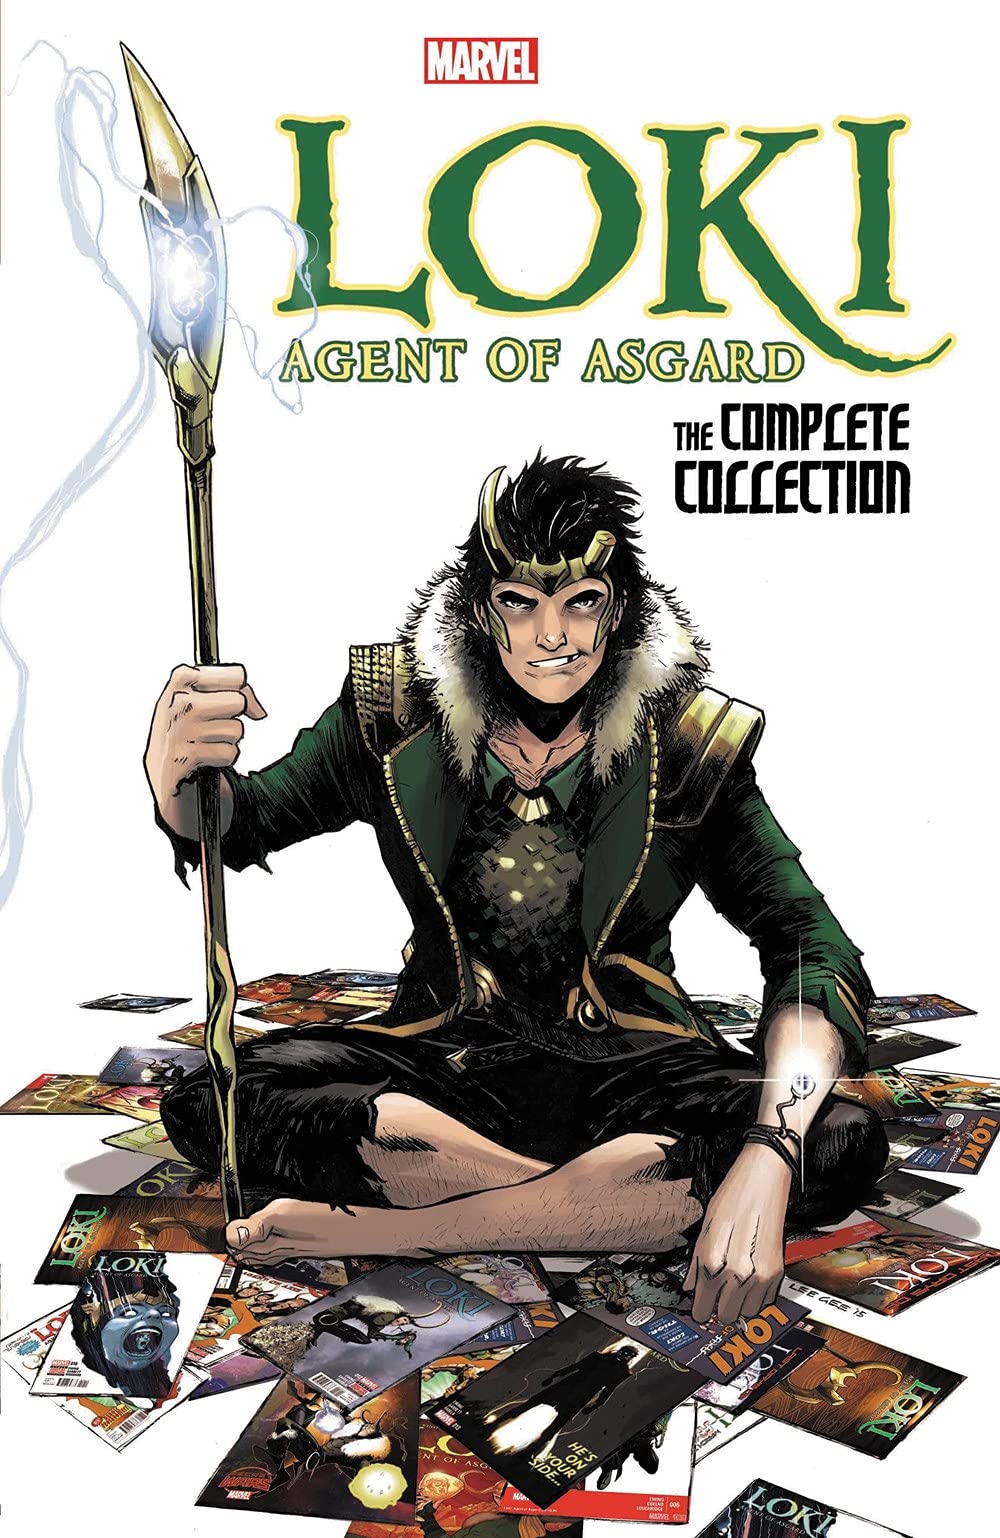 Loki,Agent of Asgard,Collection Paperback,June 8, 2021